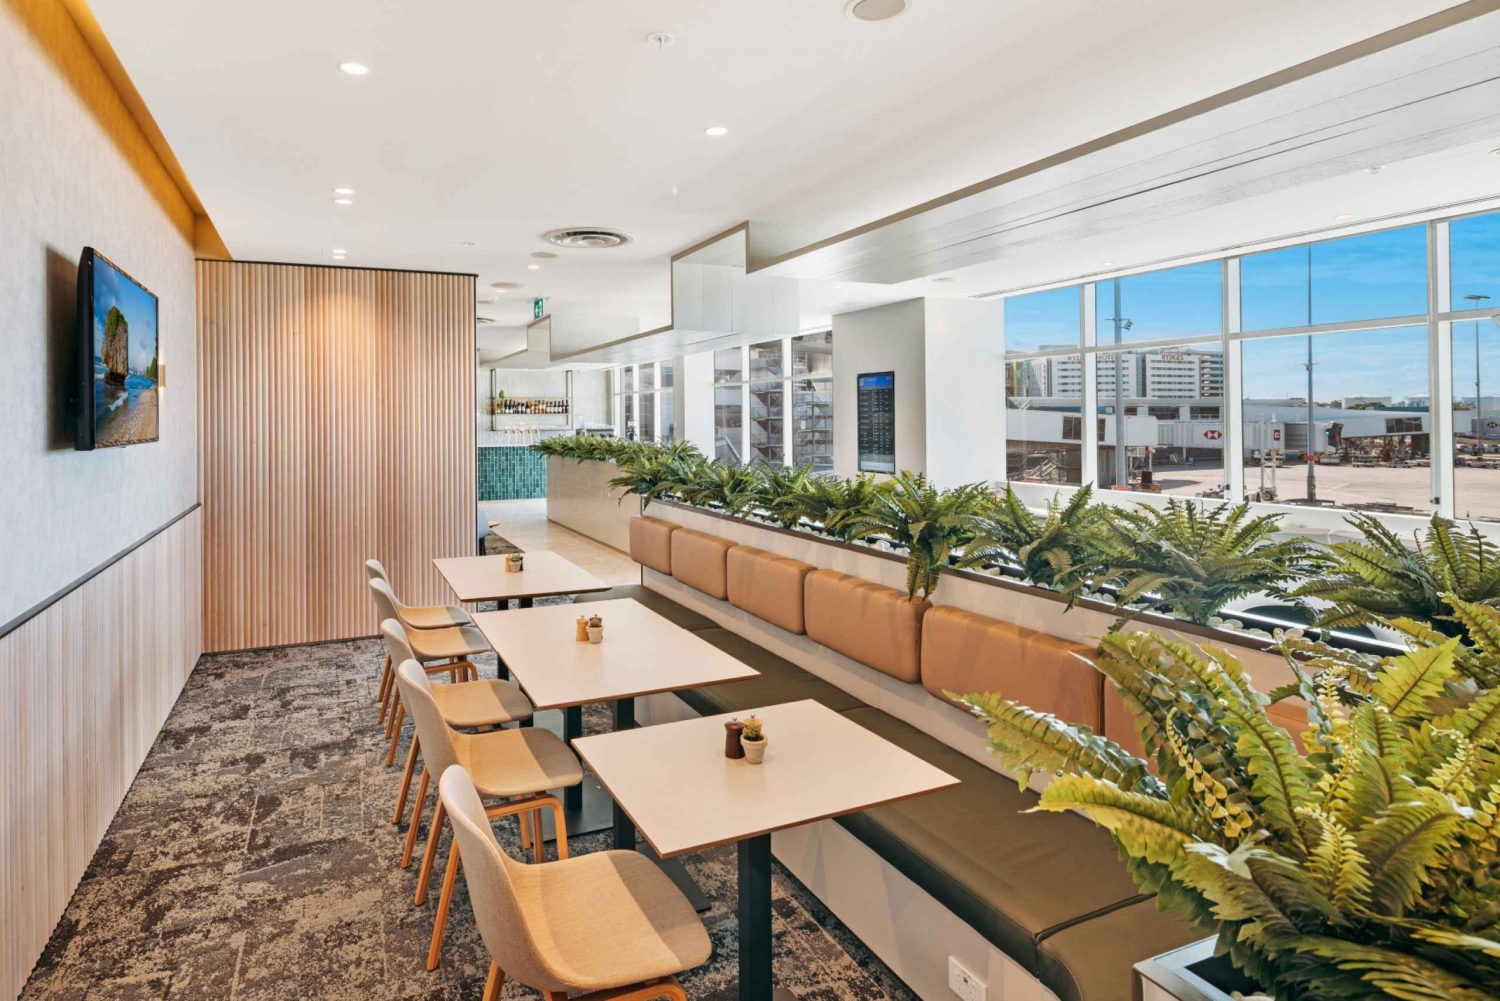 Sydney Airport (SYD): Lounge Access with Food and Drinks